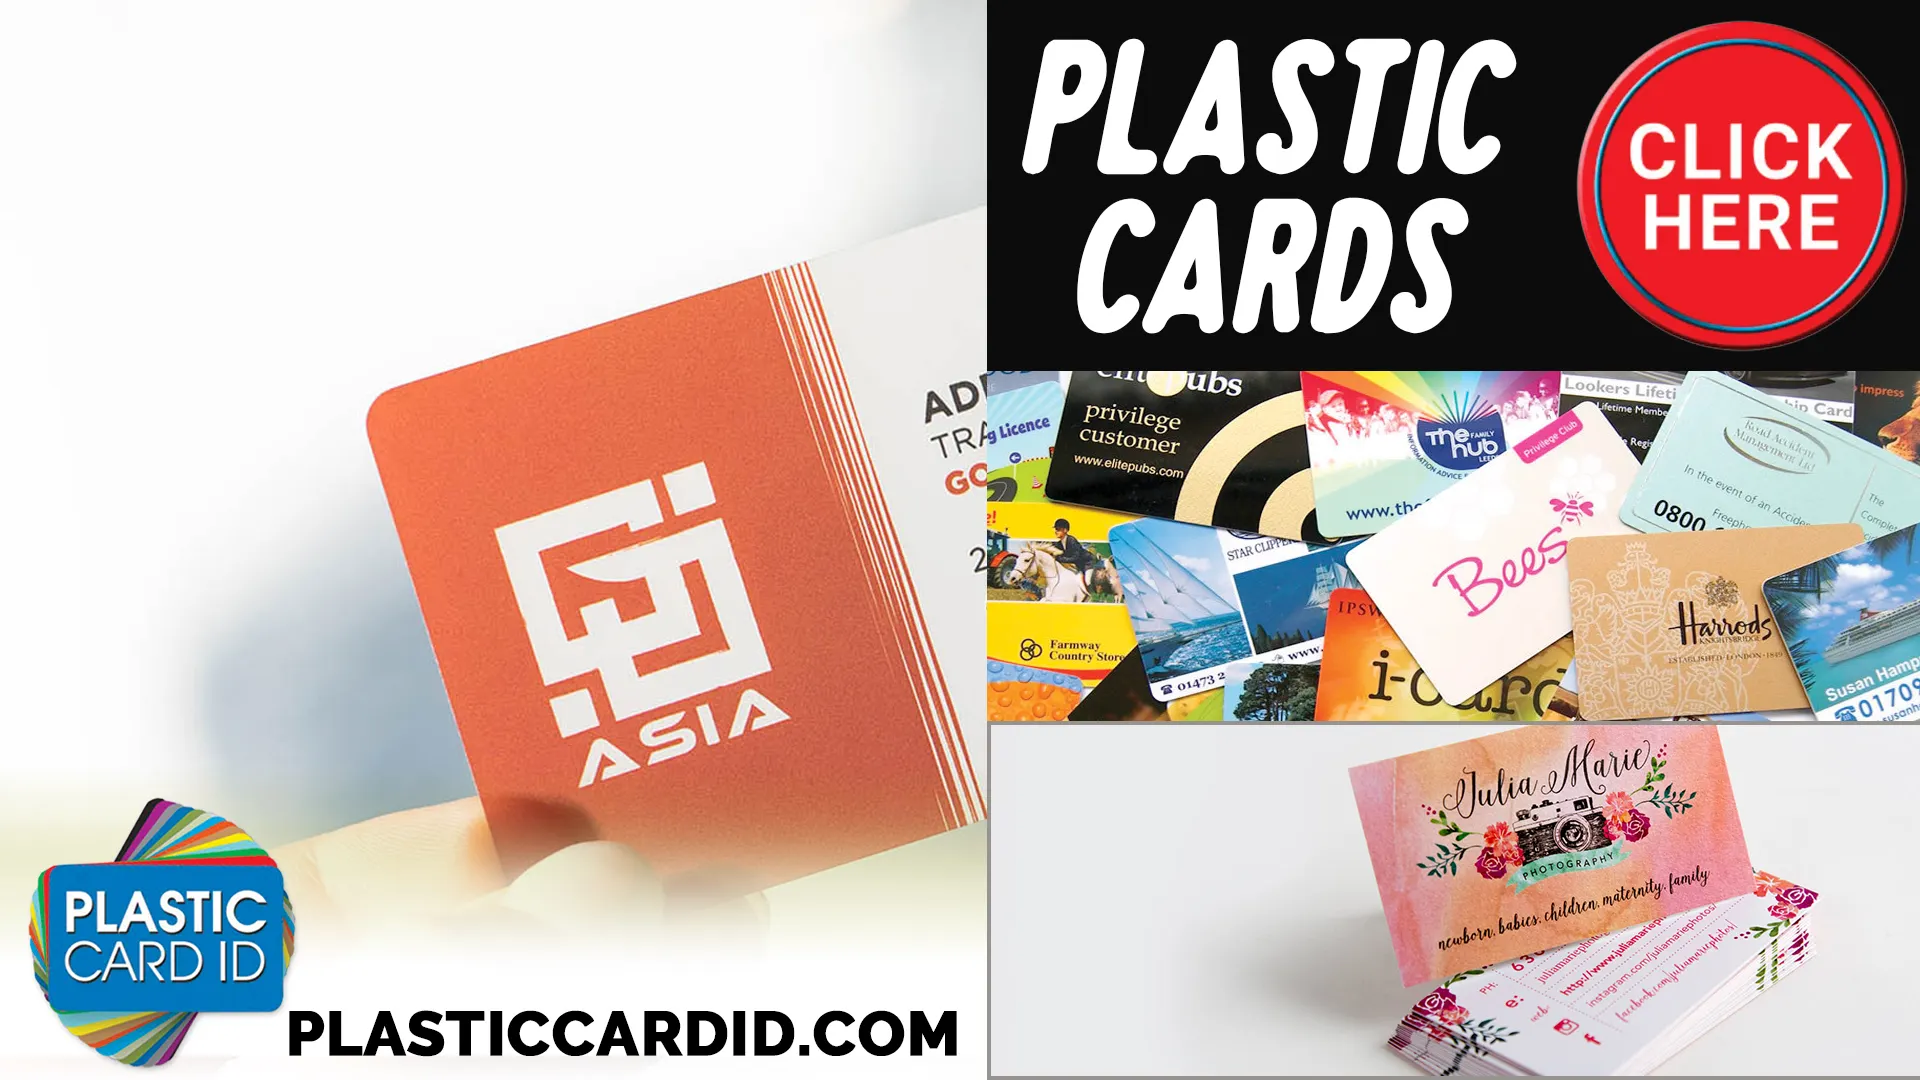 Accessories and Supplies to Complement Your Card Printing Needs